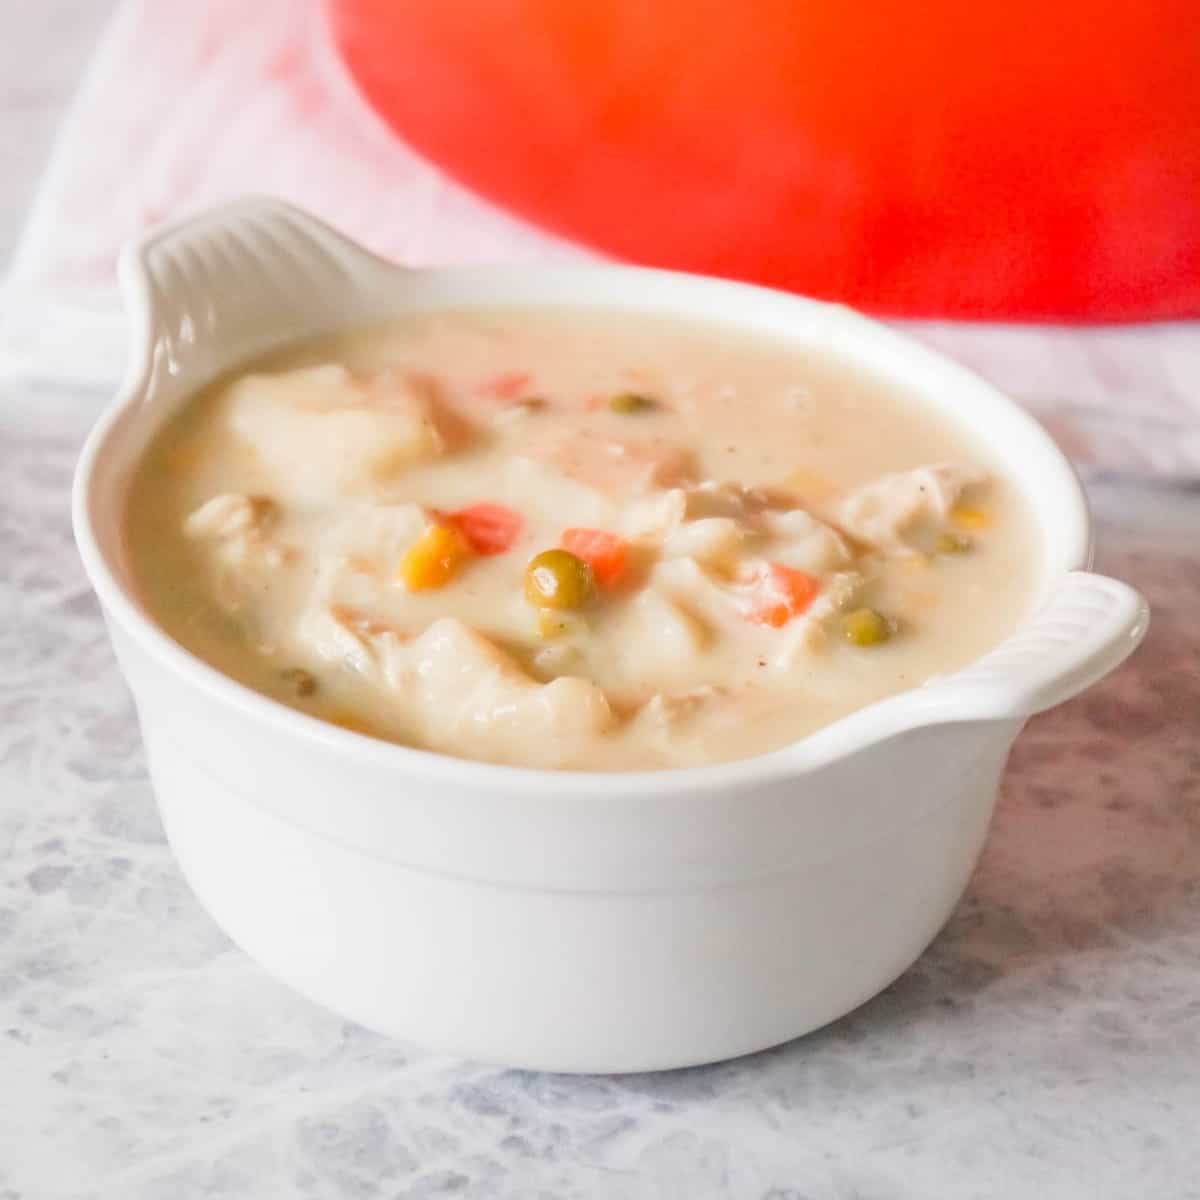 Chicken and Dumplings Soup is a hearty soup recipe using shredded rotisserie chicken, loaded with veggies and Pillsbury biscuit dumplings.